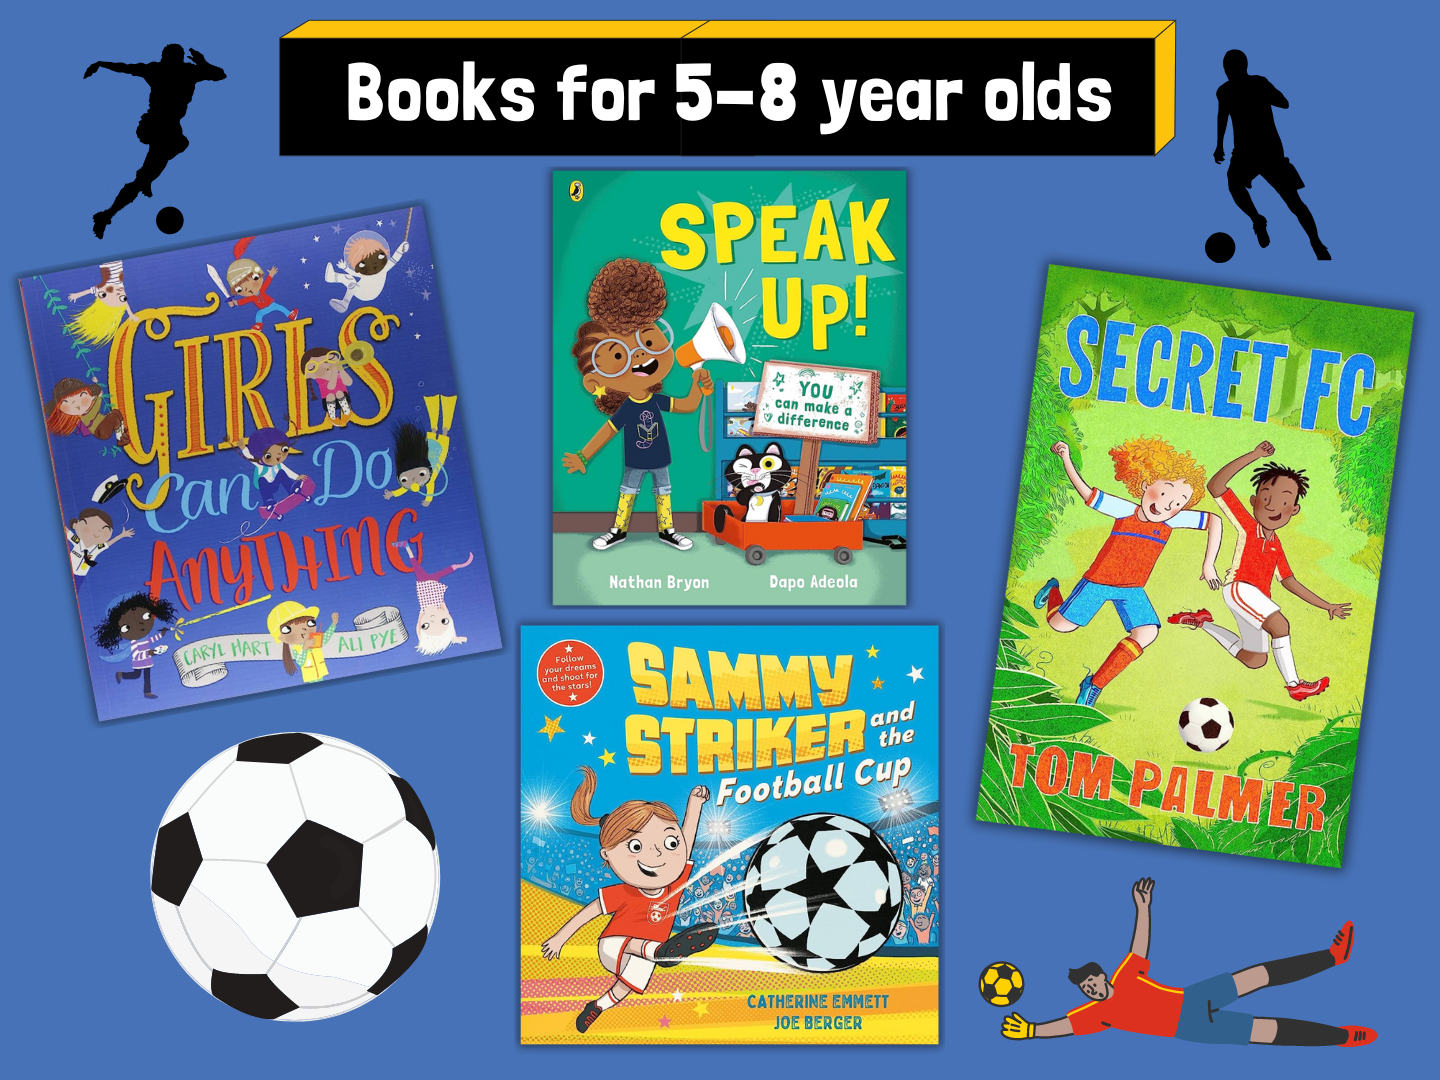 Books for 5-8 year olds